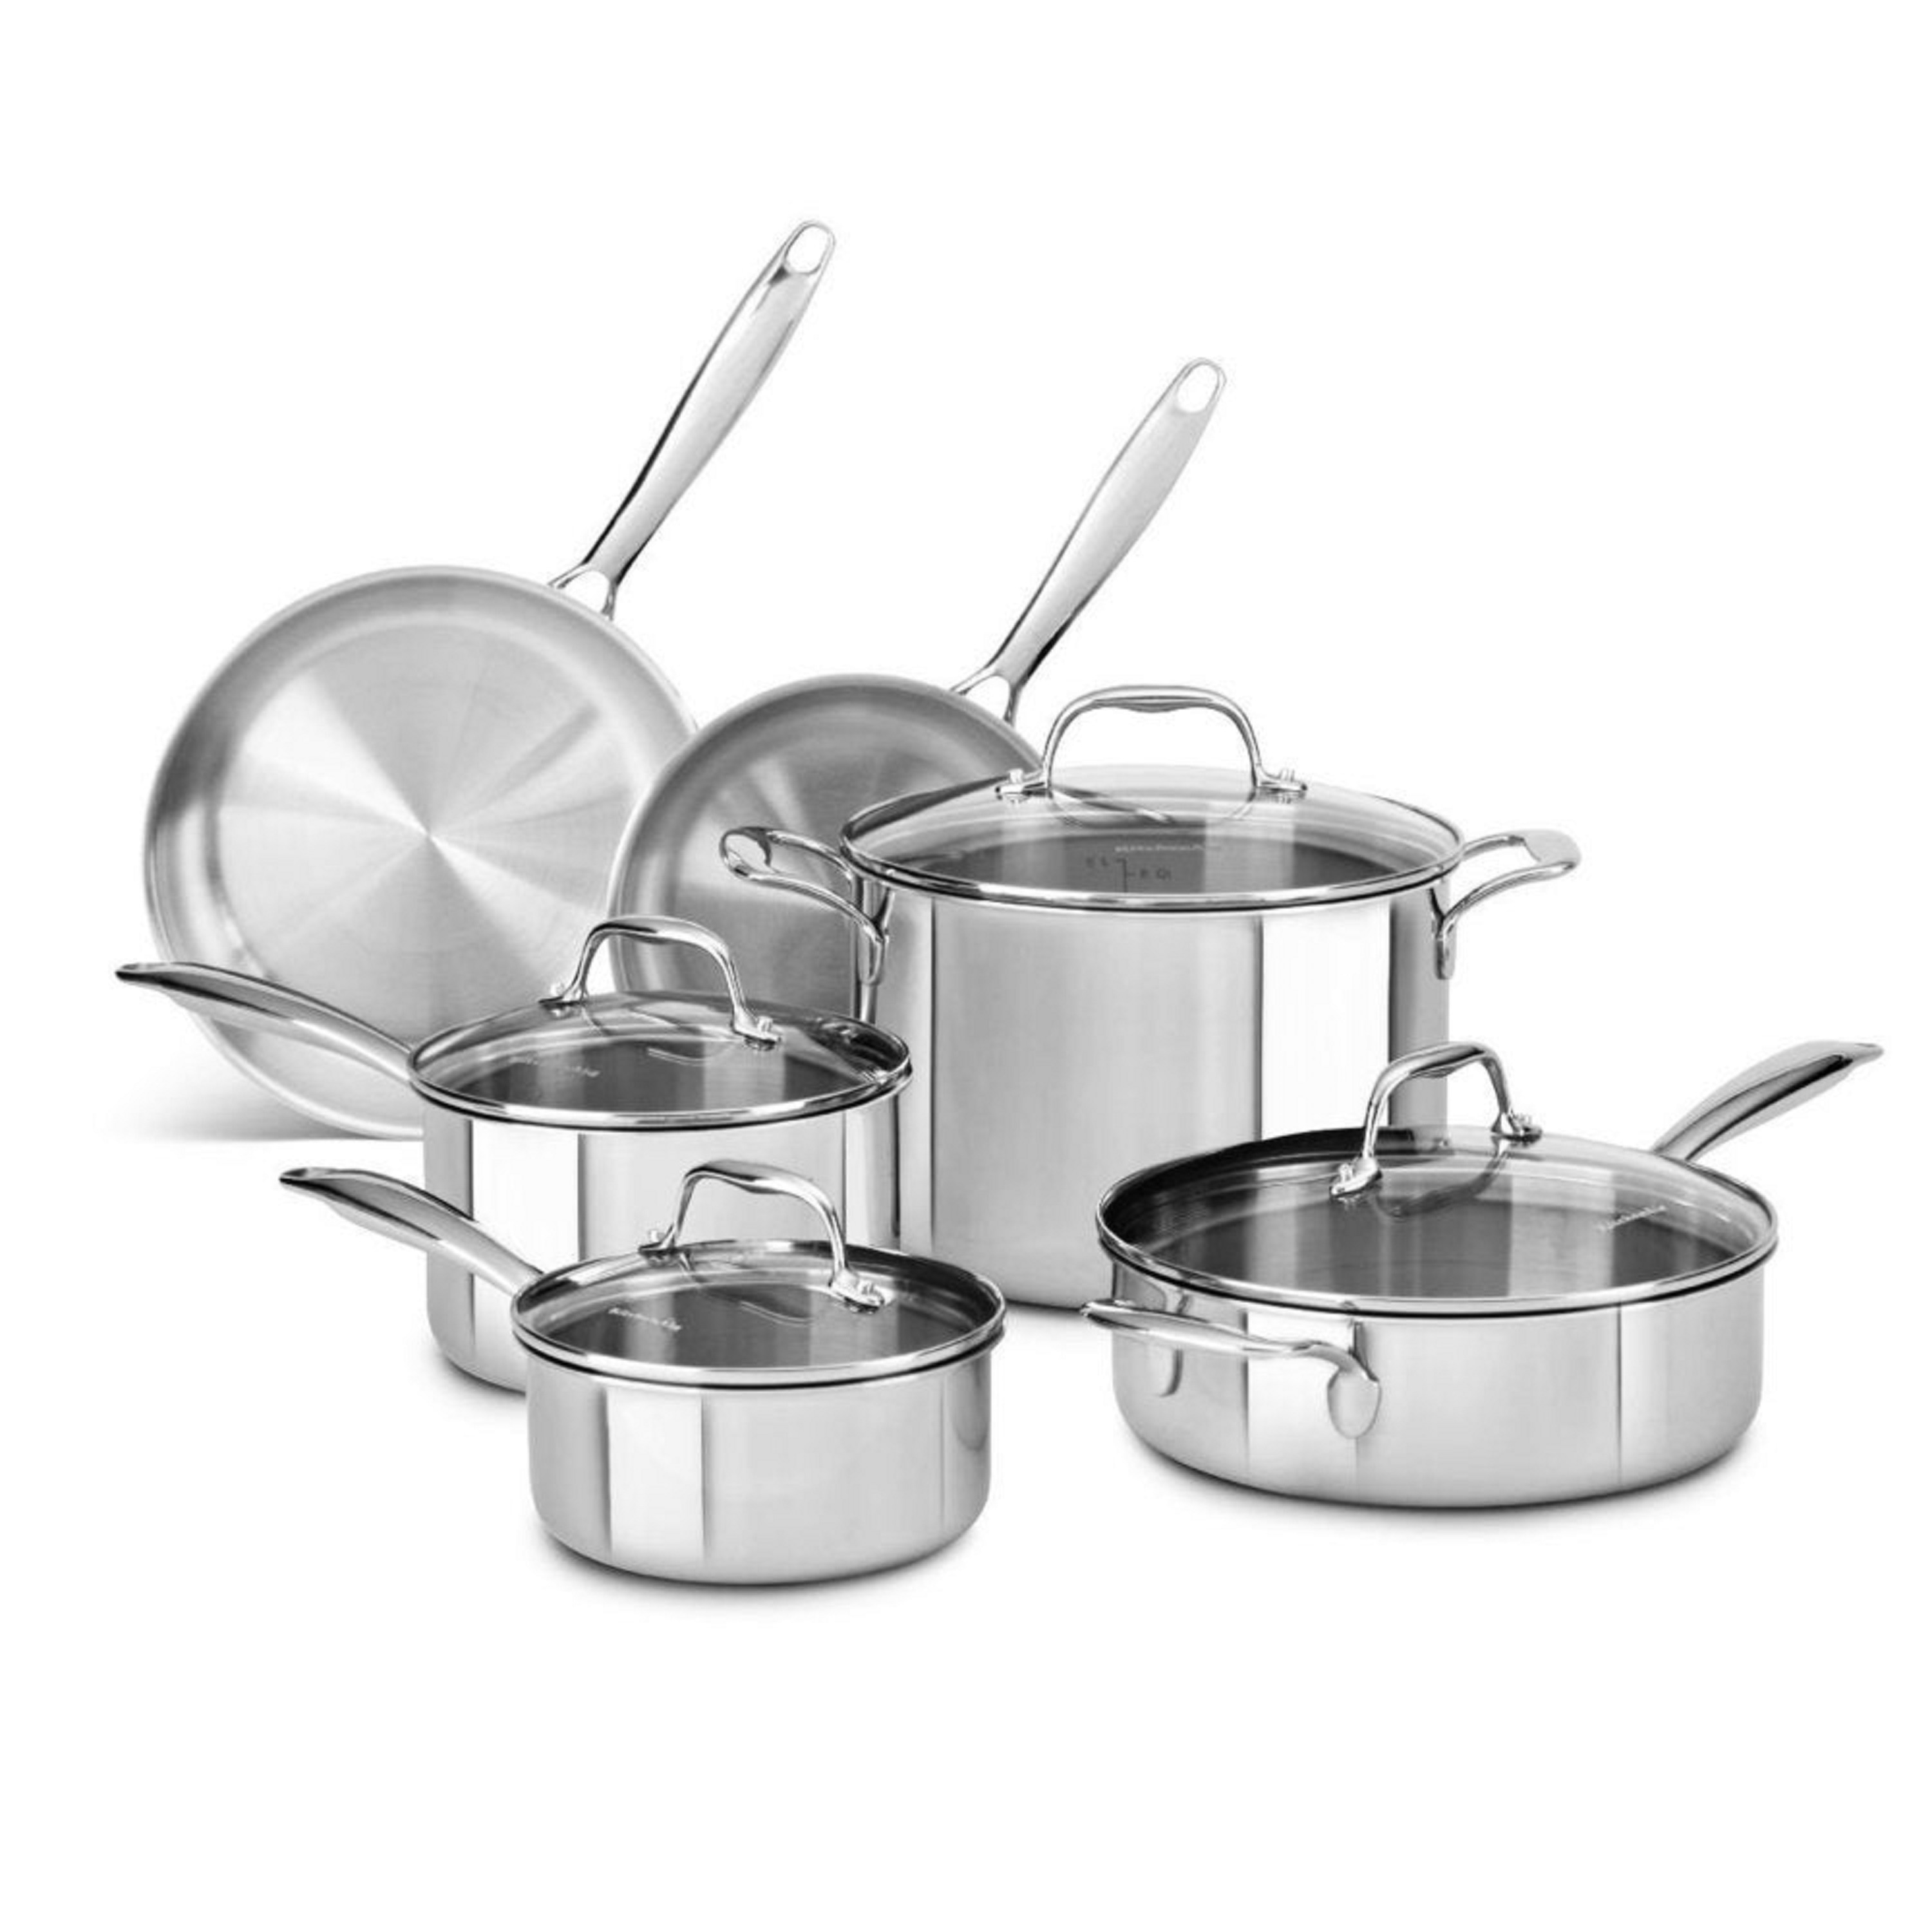 https://ak1.ostkcdn.com/images/products/is/images/direct/954f407e31cc63295f8487e7fc81c8e9162b93f7/KitchenAid-Stainless-Steel-10-piece-Tri-ply-Cookware-Set.jpg